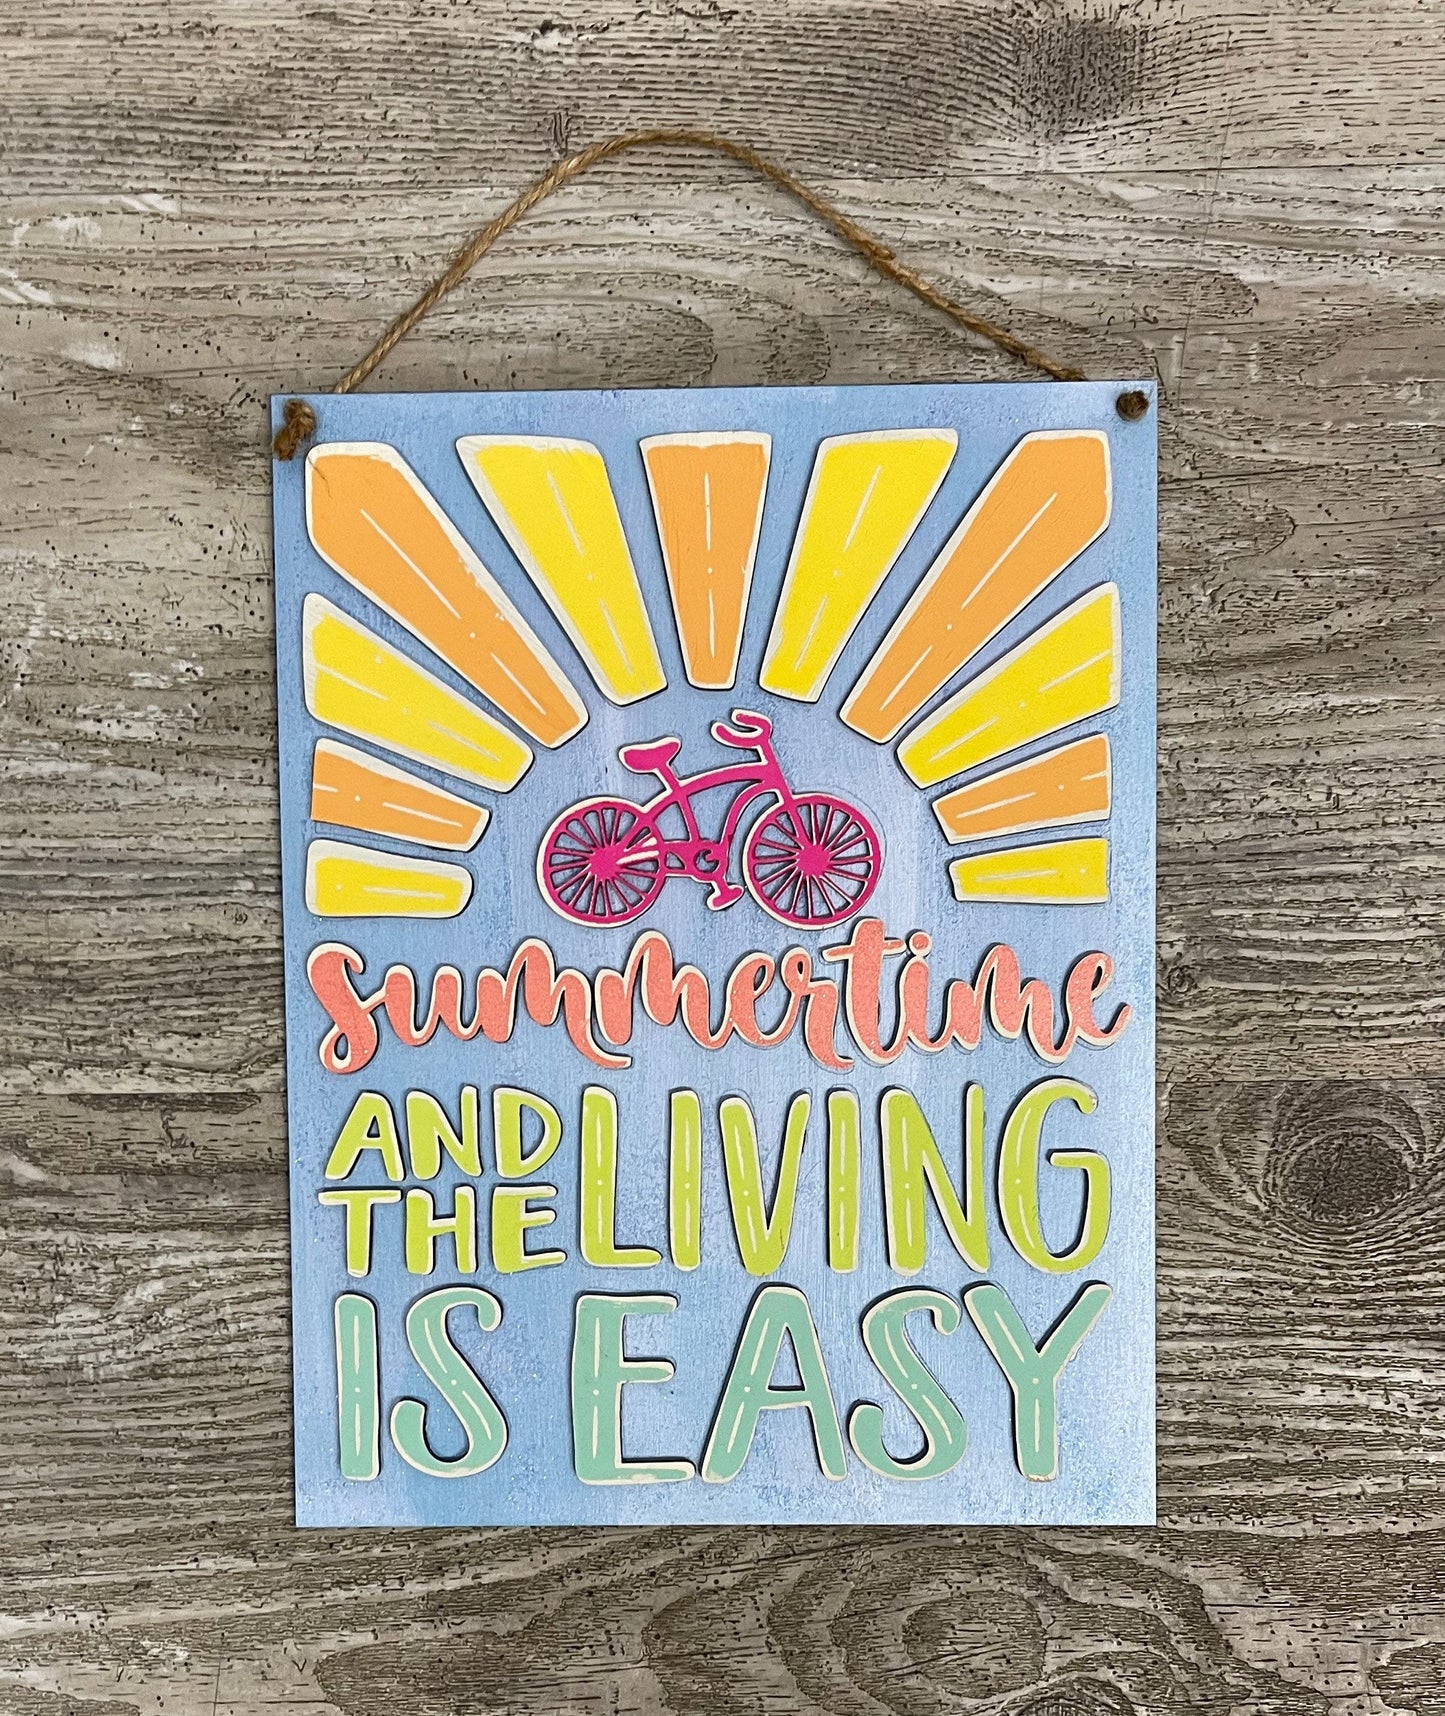 Summertime and the living is easy sign kit cutouts - unpainted wooden cutouts, ready for you to paint